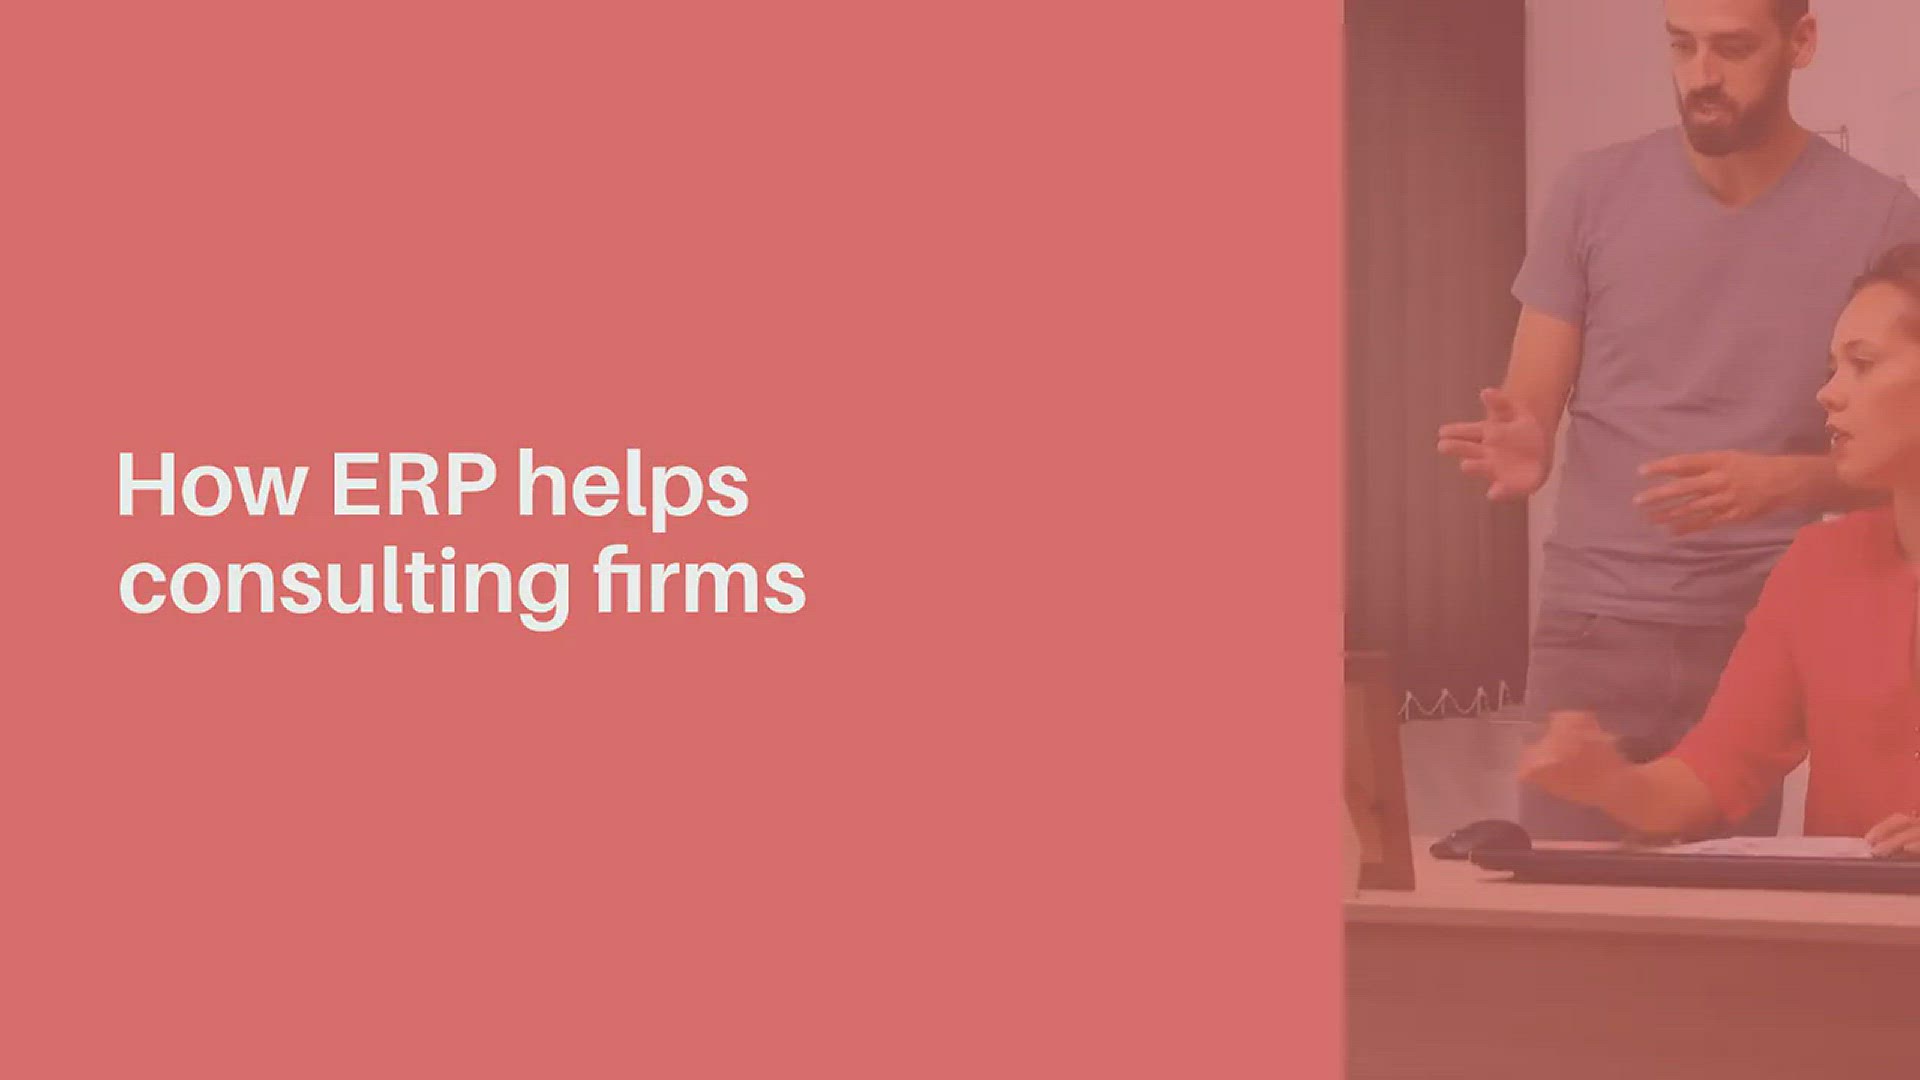 'Video thumbnail for How ERP helps consulting firms'